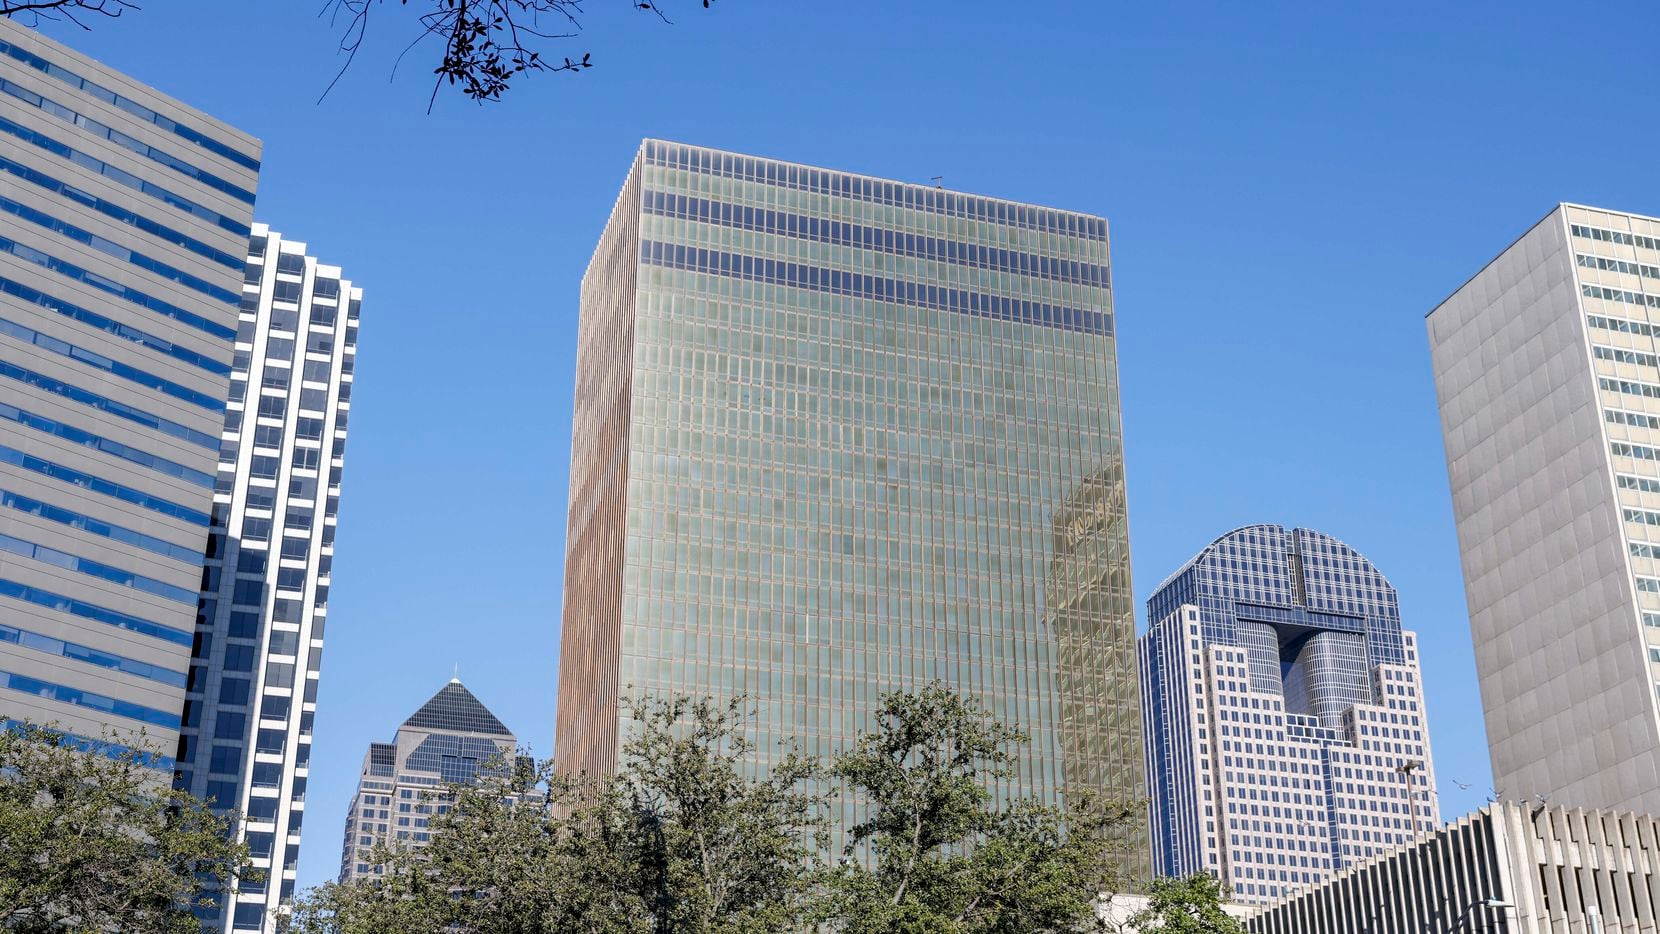 The upper floors of the landmark Bryan Tower in downtown Dallas will be converted to luxury apartments.